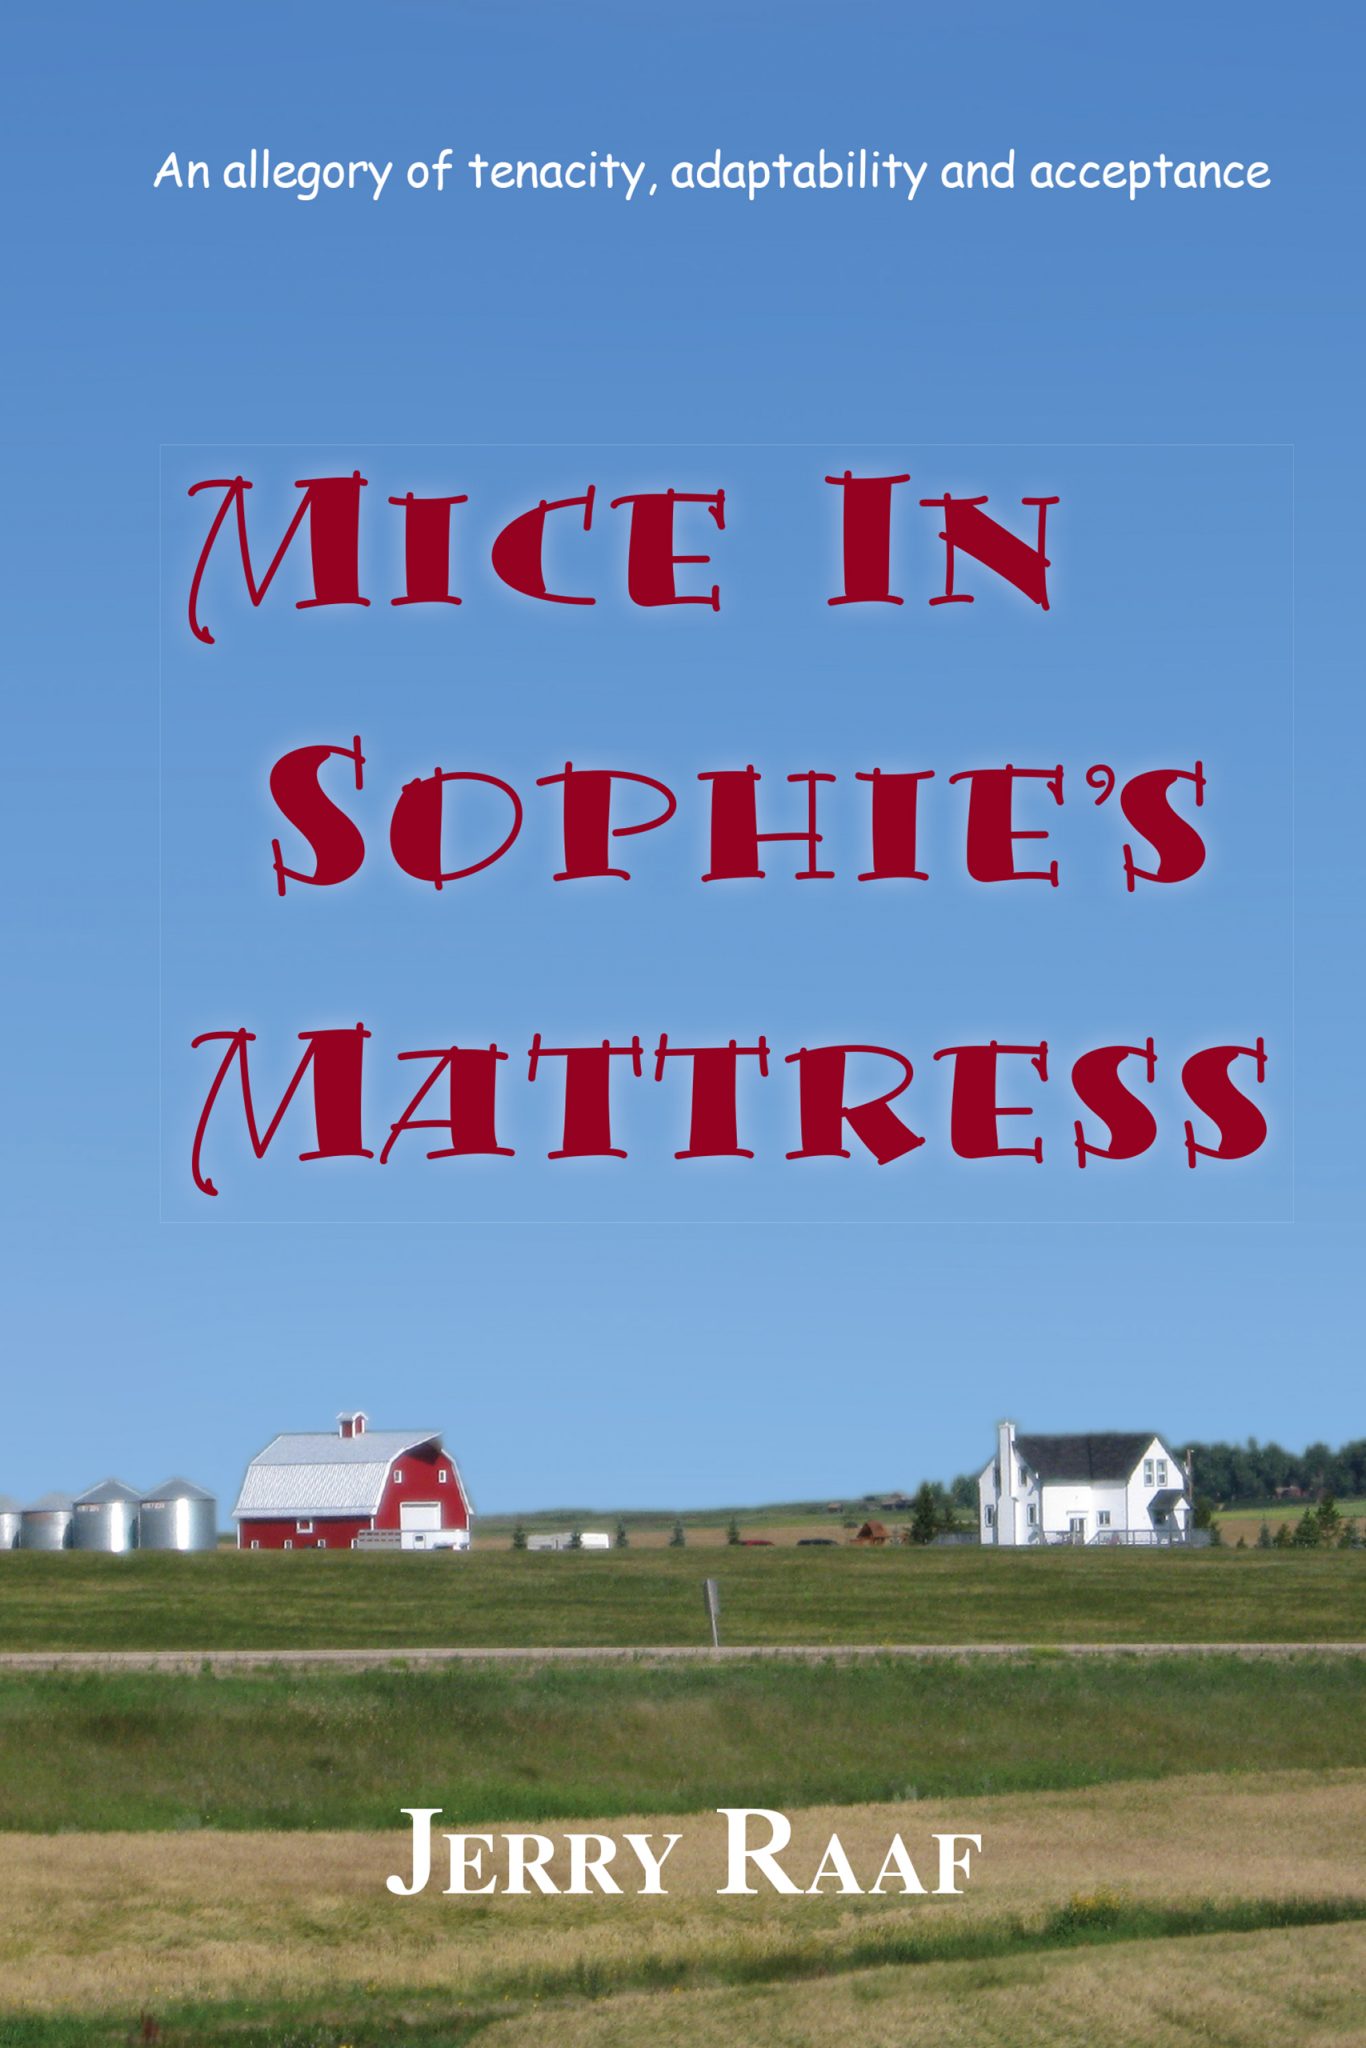 Book Review: The Mice in Sophie’s Mattress